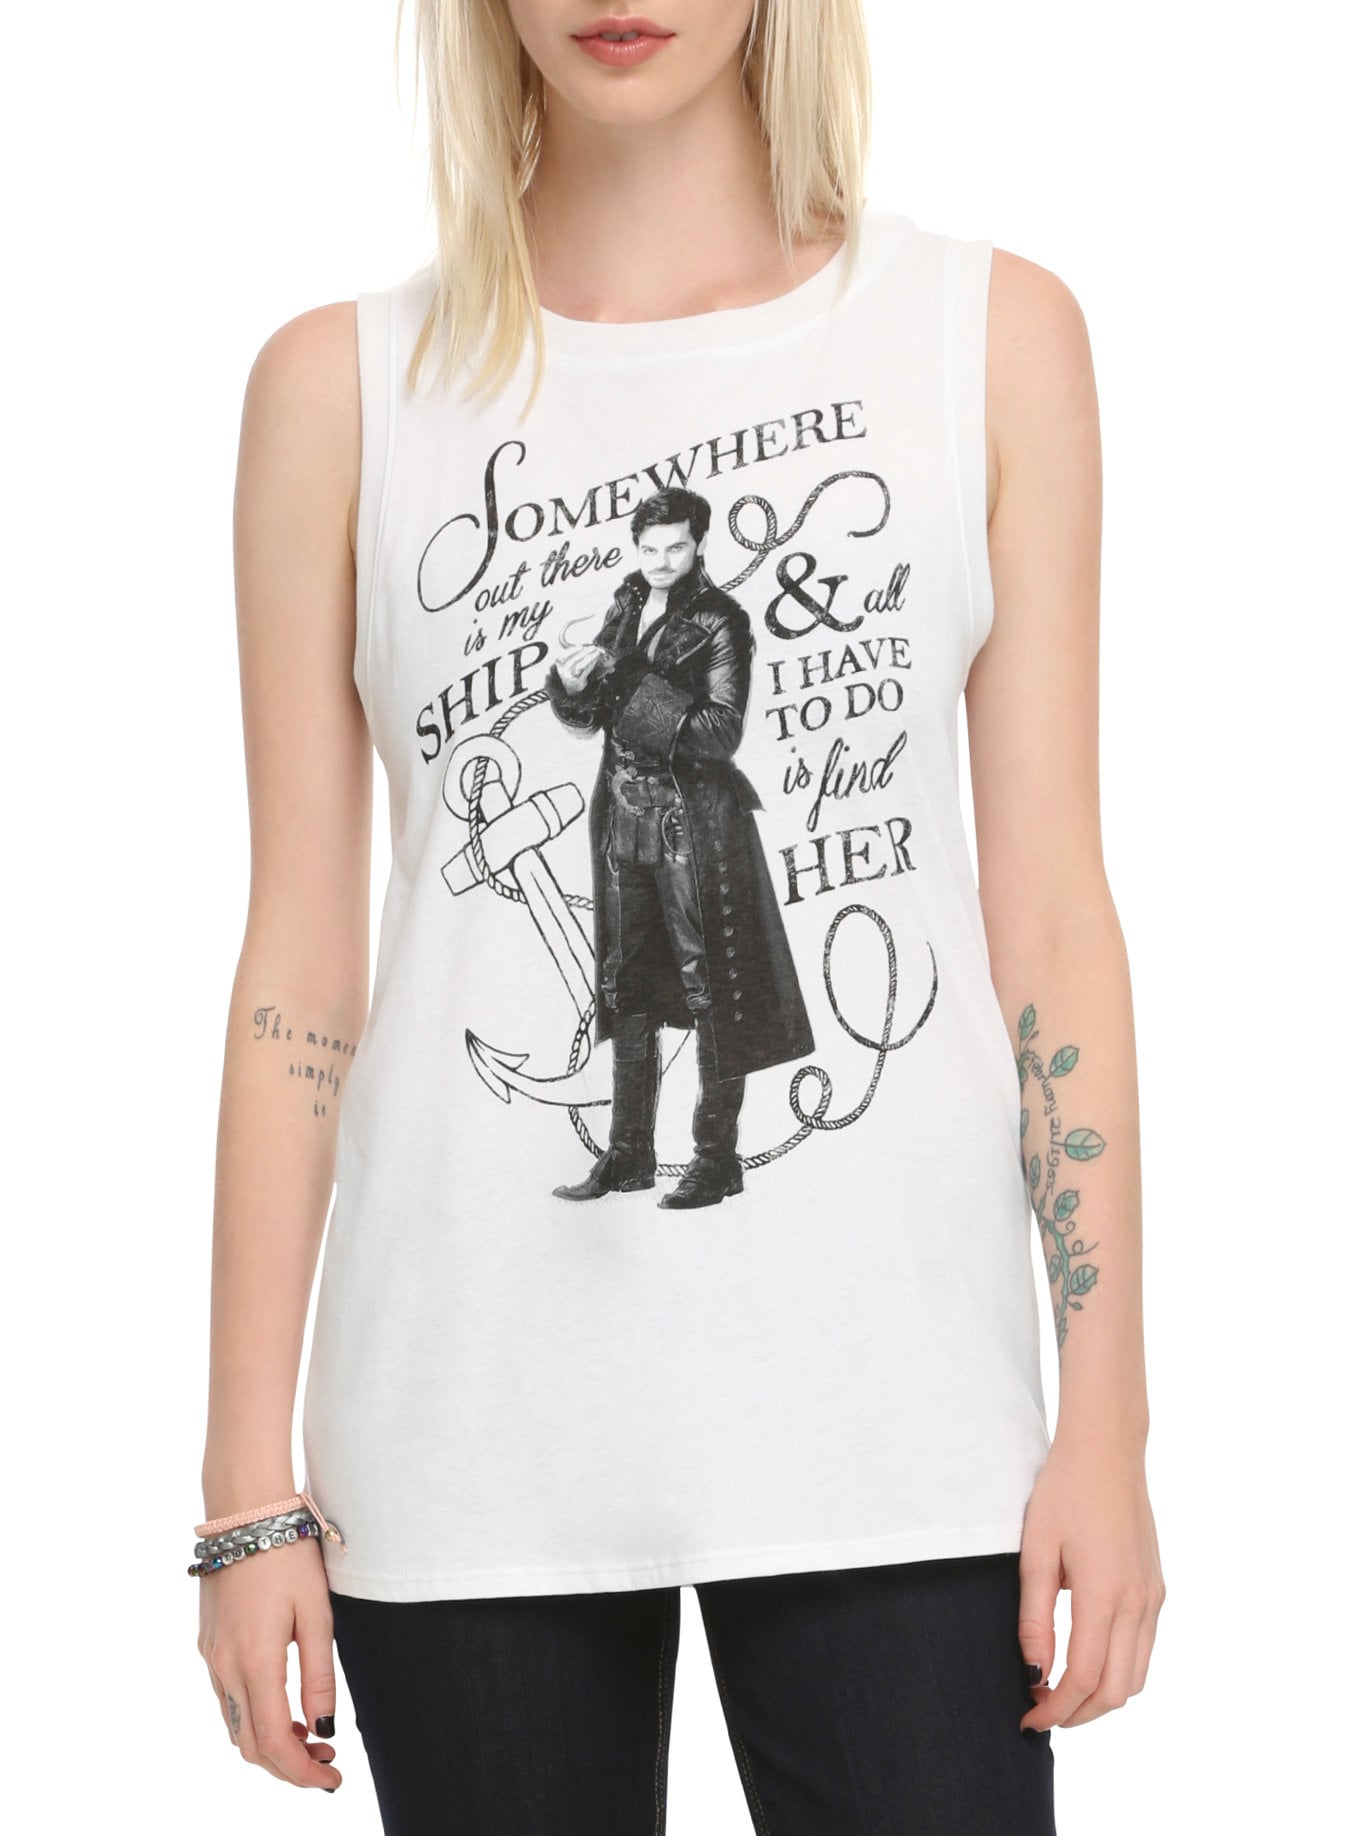 Gifts For People Who Love Captain Hook on Once Upon a Time